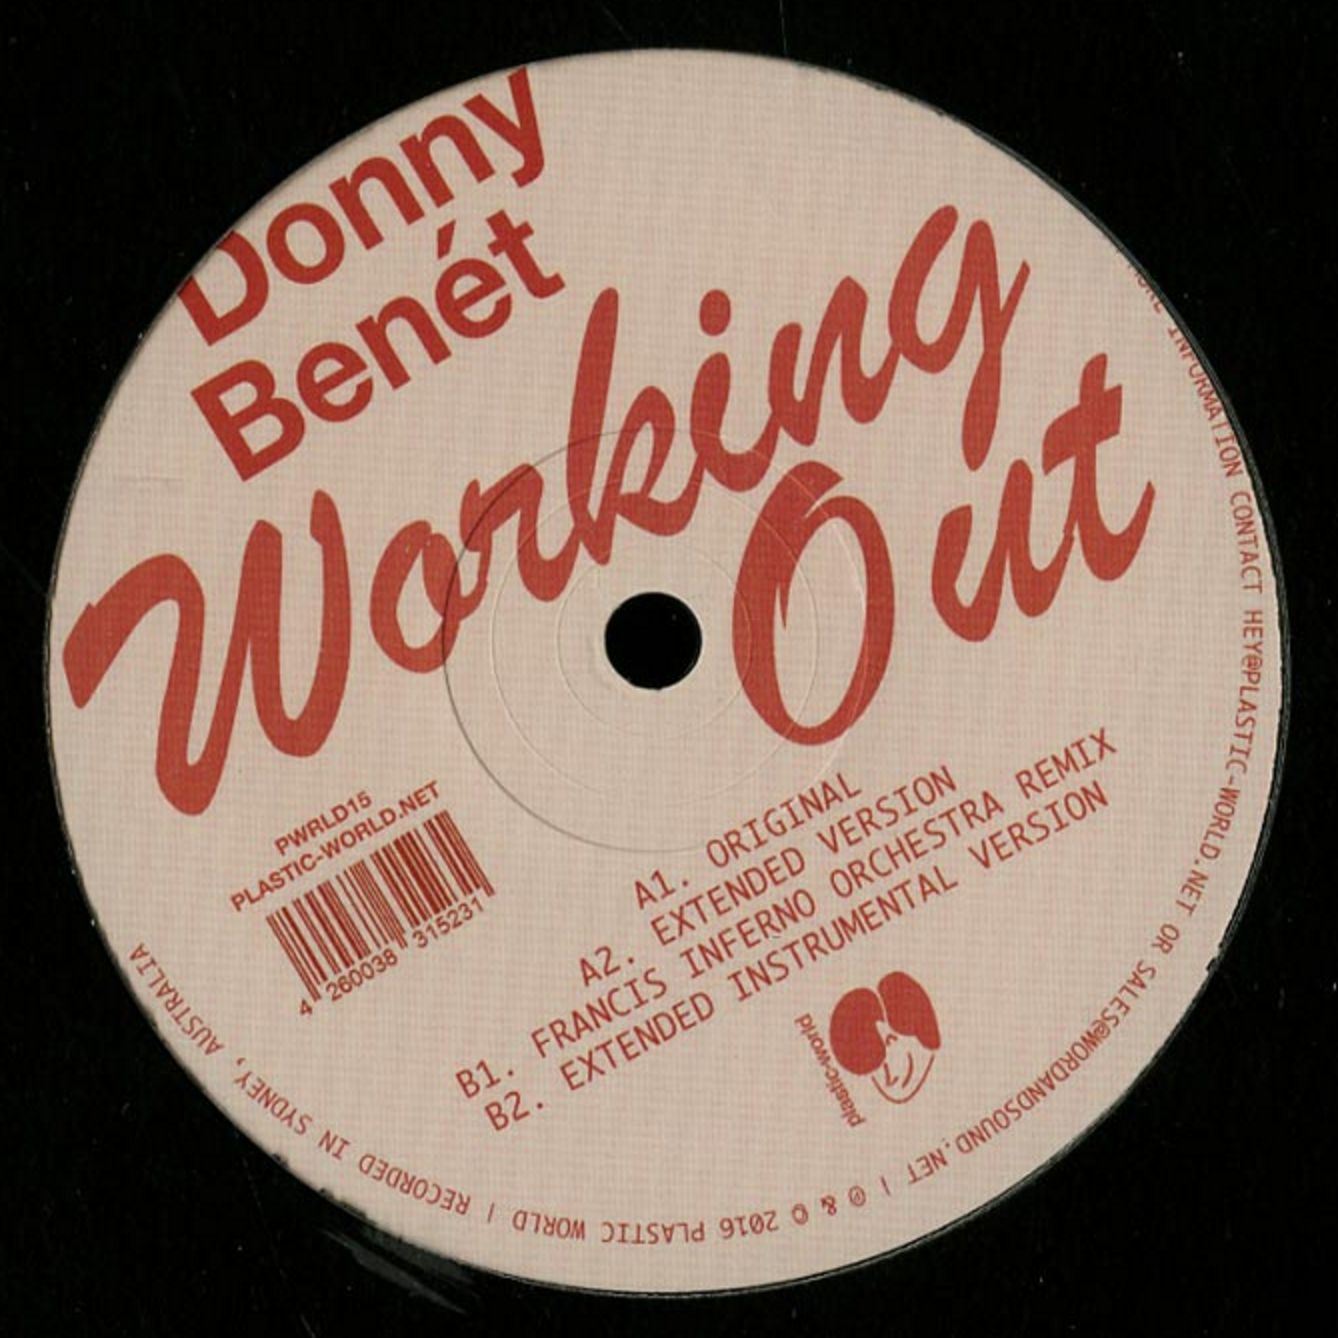 Pakua Donny Benet - Working Out (FIO's Yarra Bend Reprise)